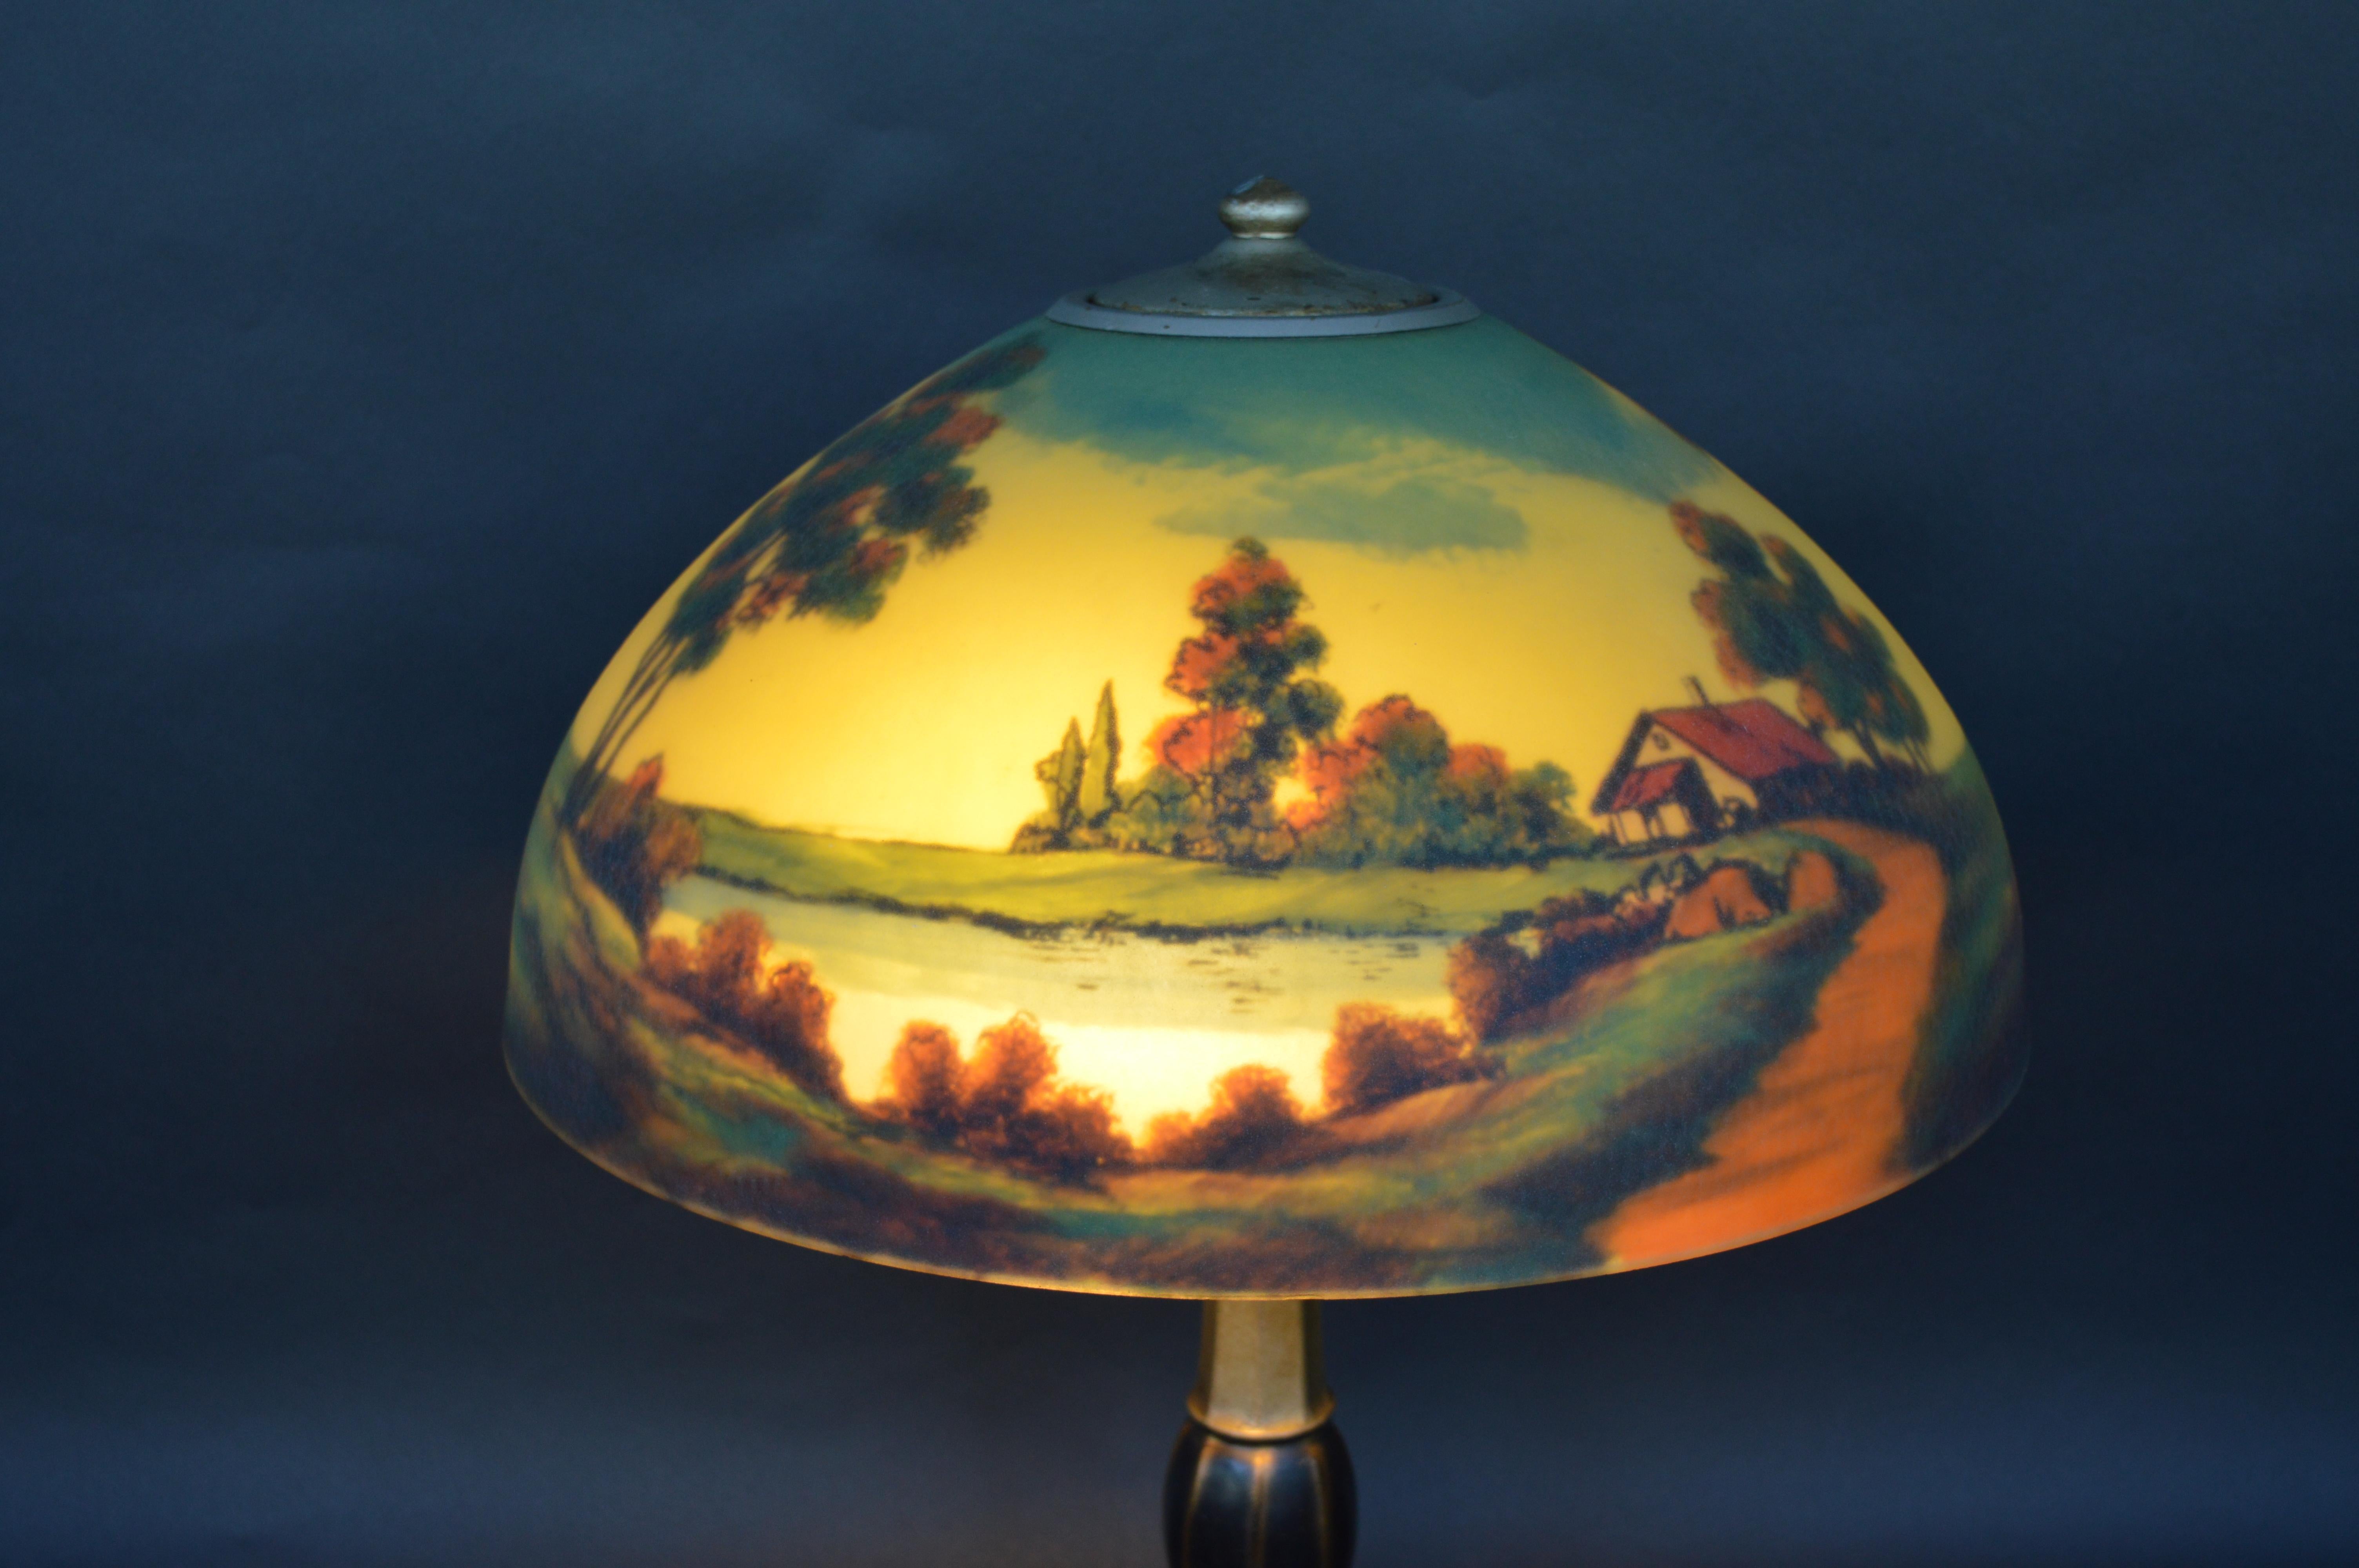 Pittsburg Jefferson lakeside cottage table lamp, circa 1900-1925
Reverse painted glass shade with painted iron base. Country lake scene landscape.